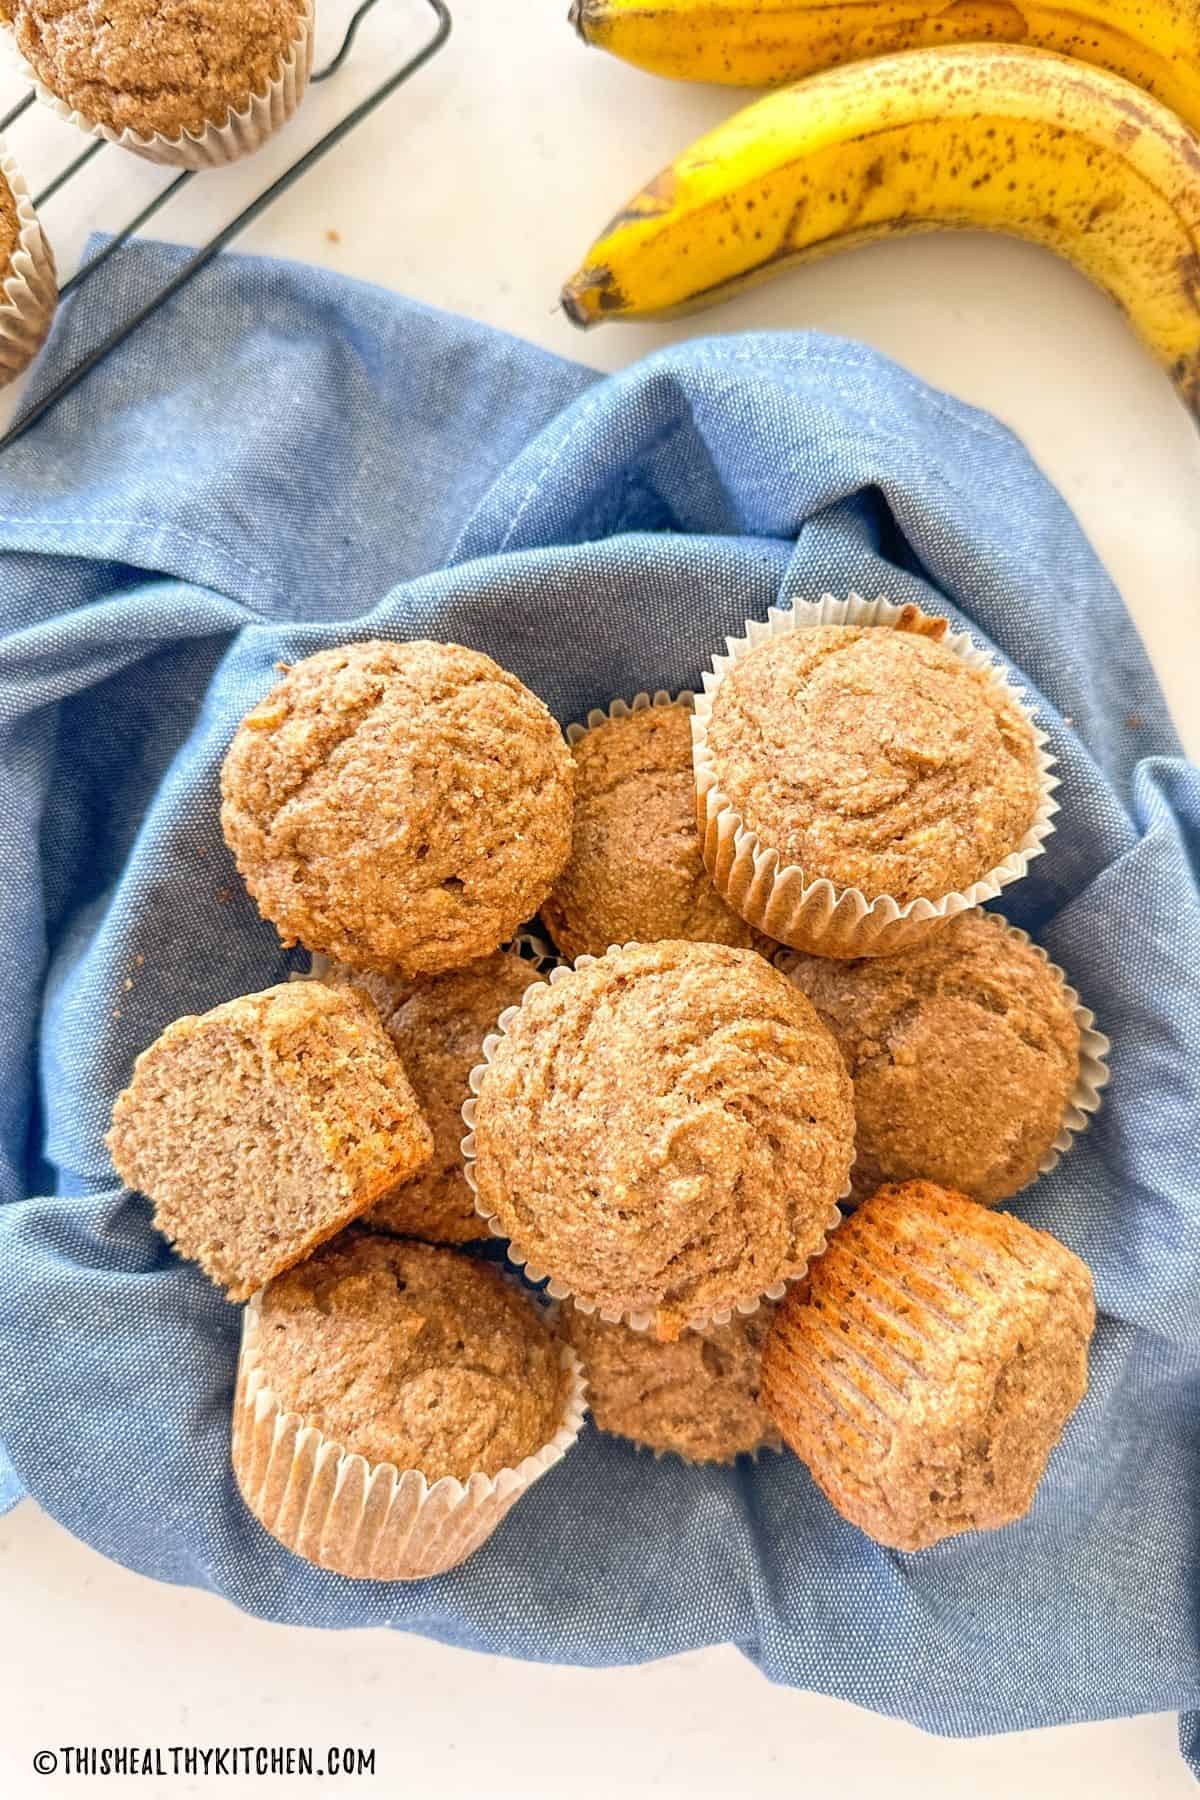 Buckwheat muffins in bowl with blue dish towel below it.